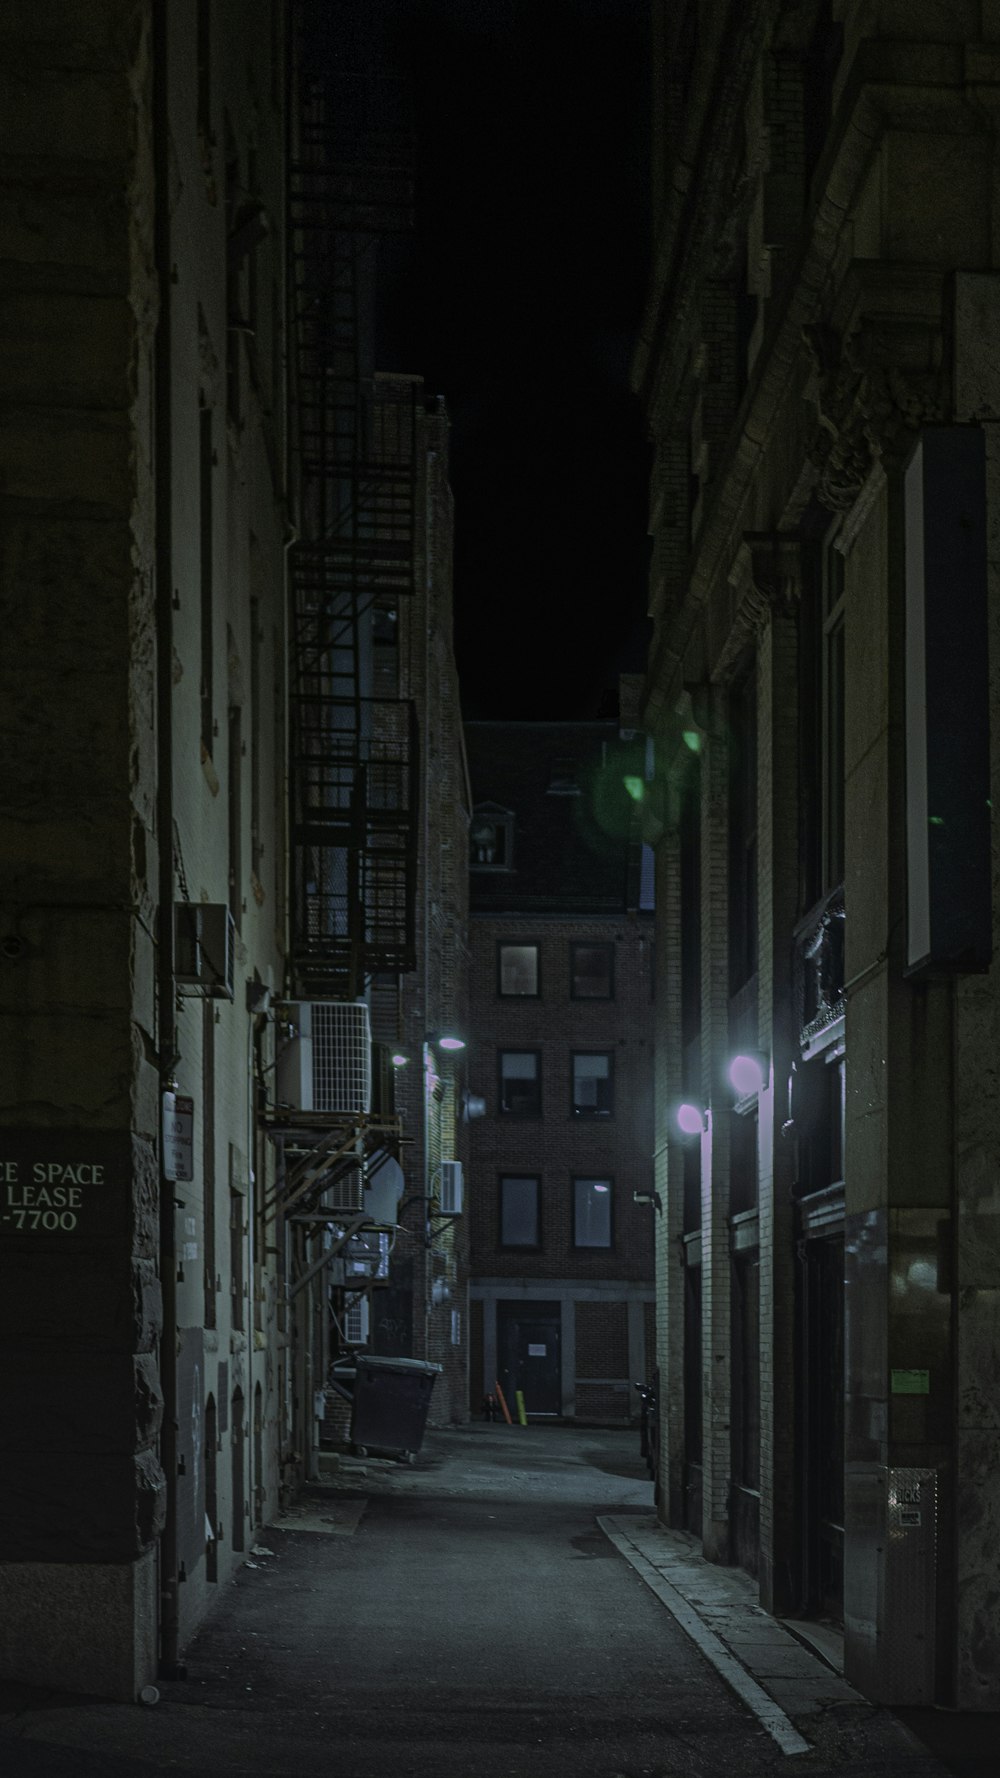 a dark alley way with buildings and a street light